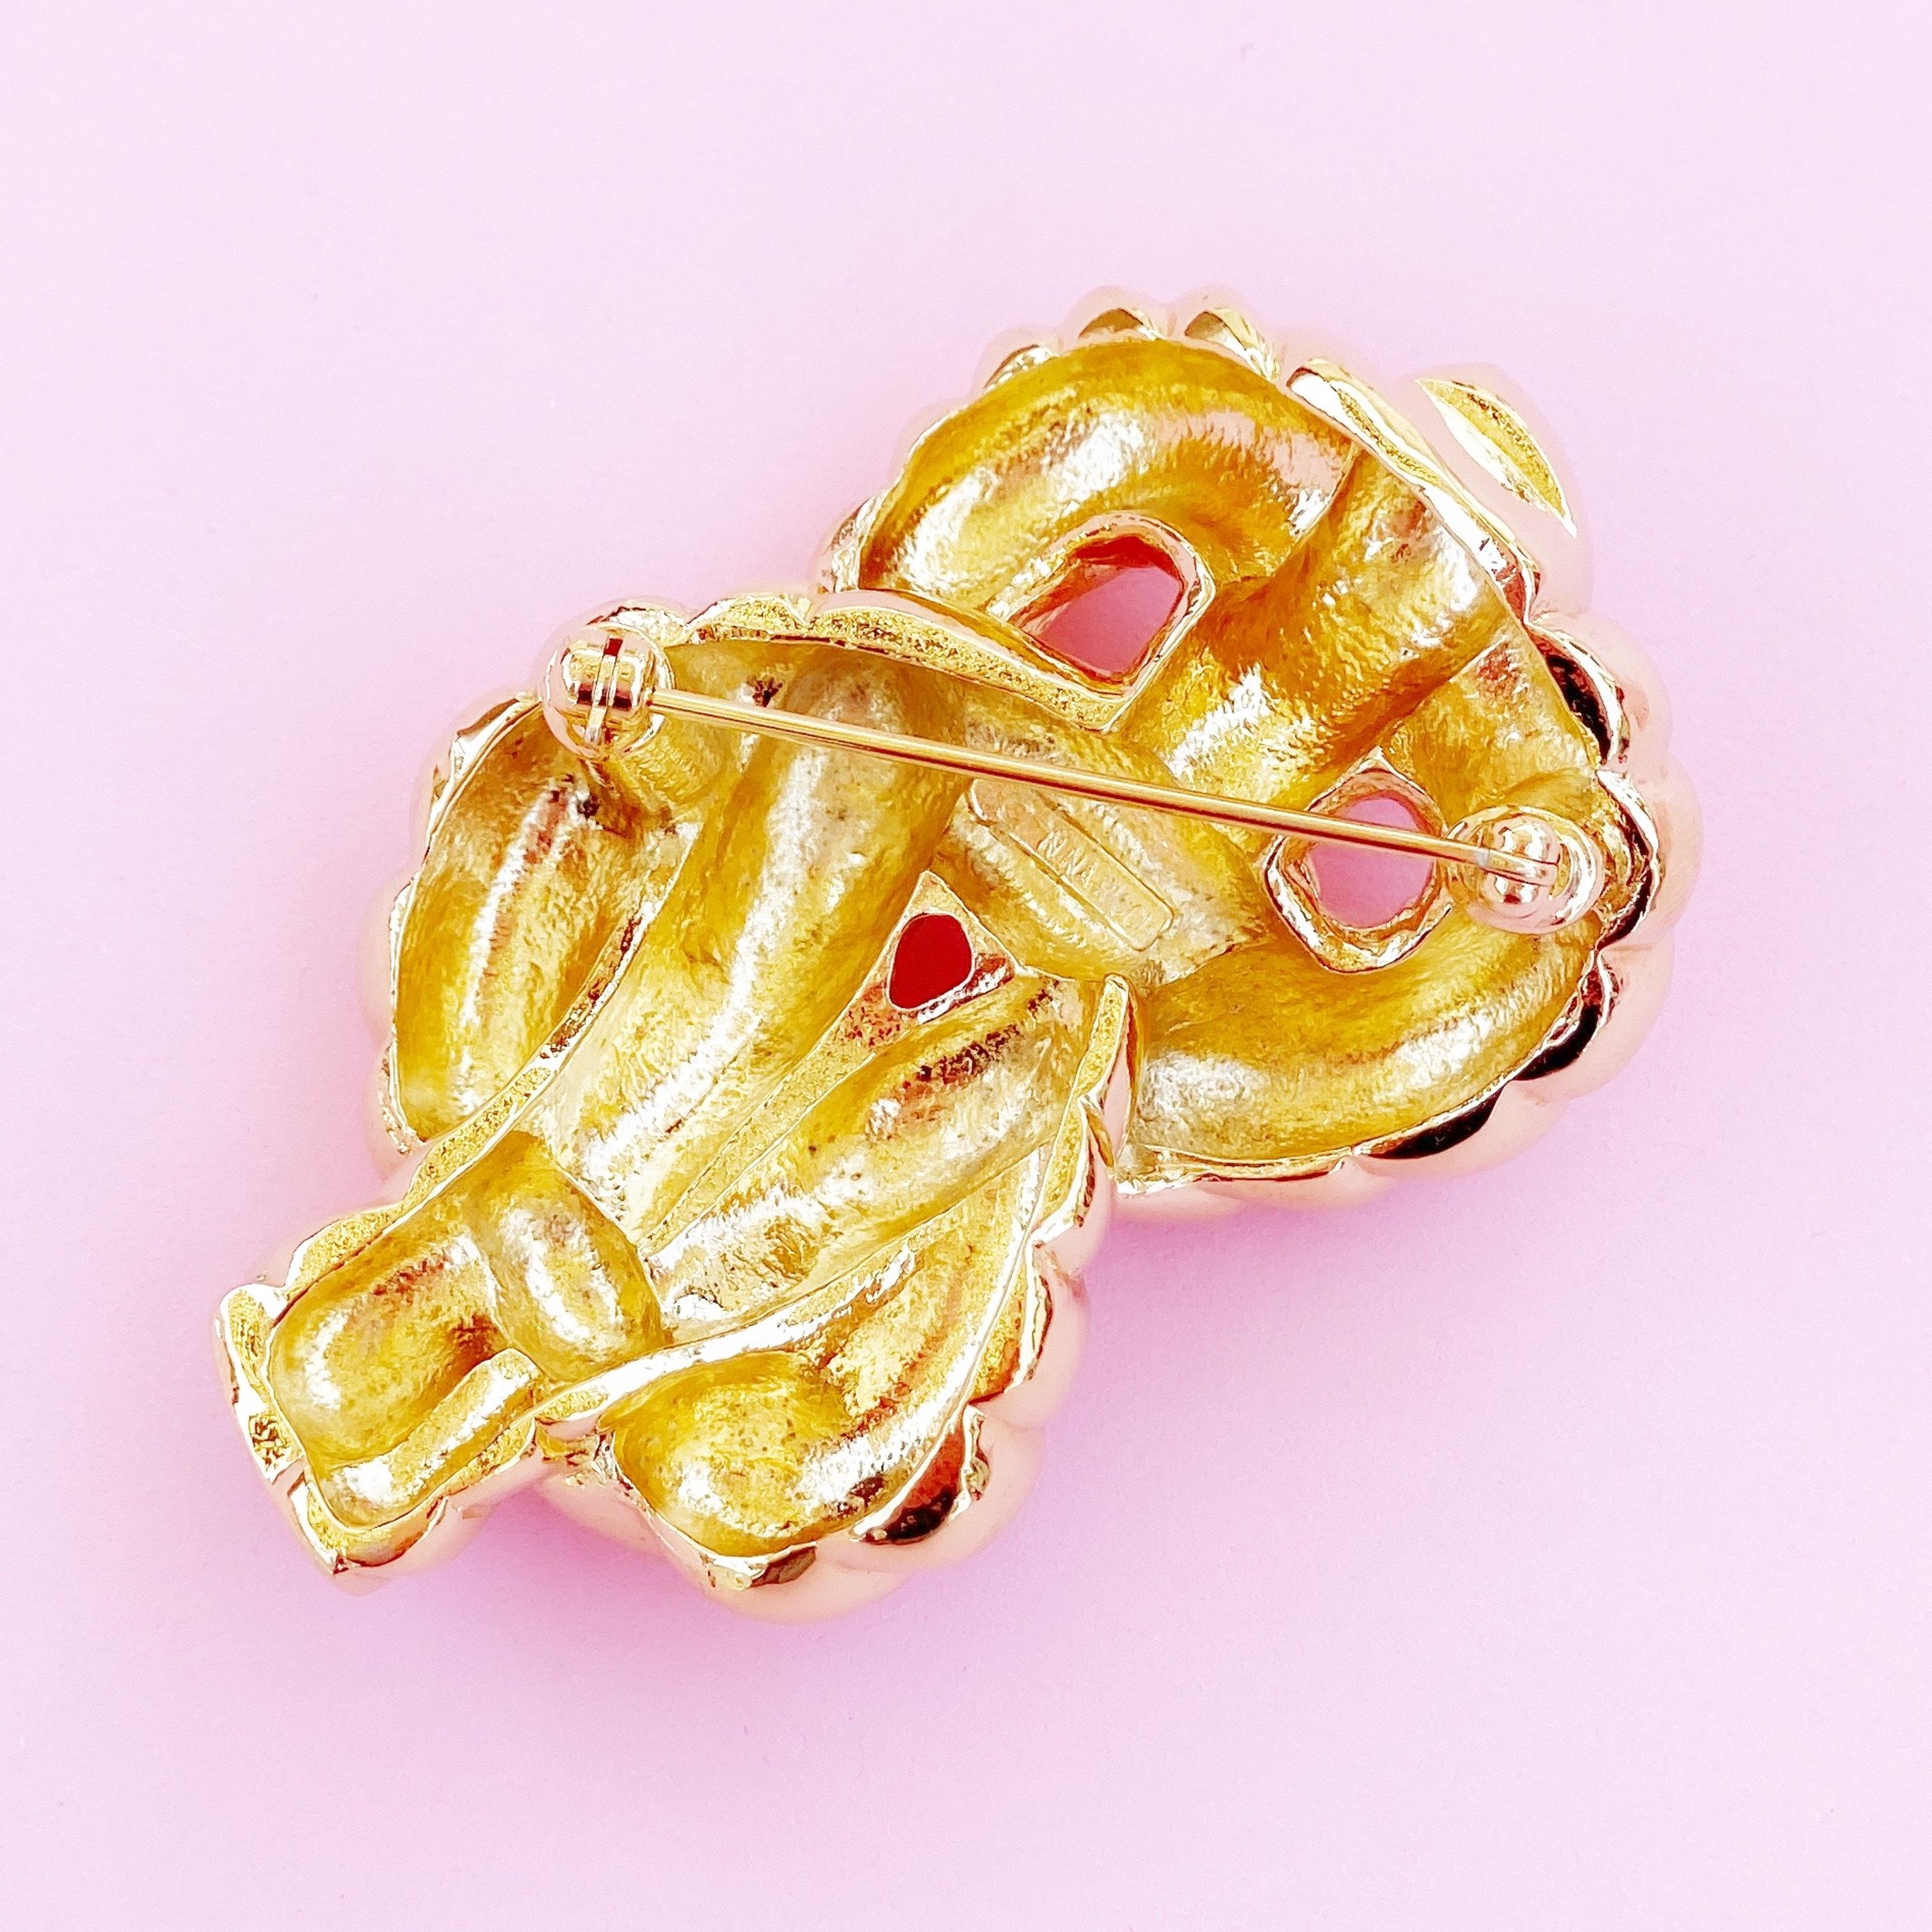 Modern Gilded Twisted Knot Brooch By Nina Ricci, 1980s For Sale